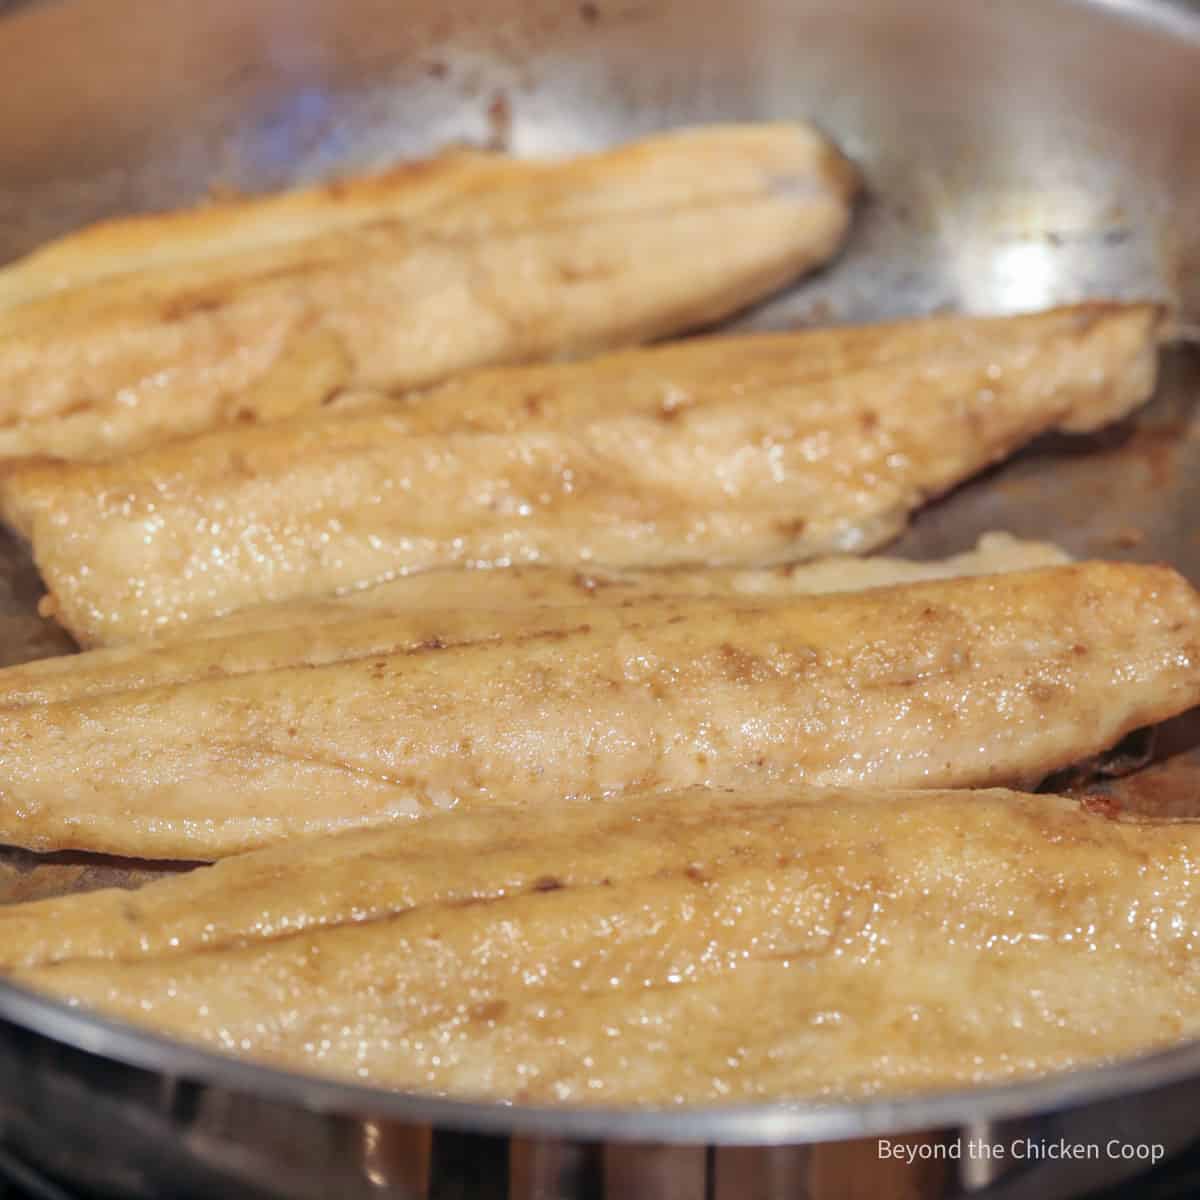 Trout cooking in a pan.